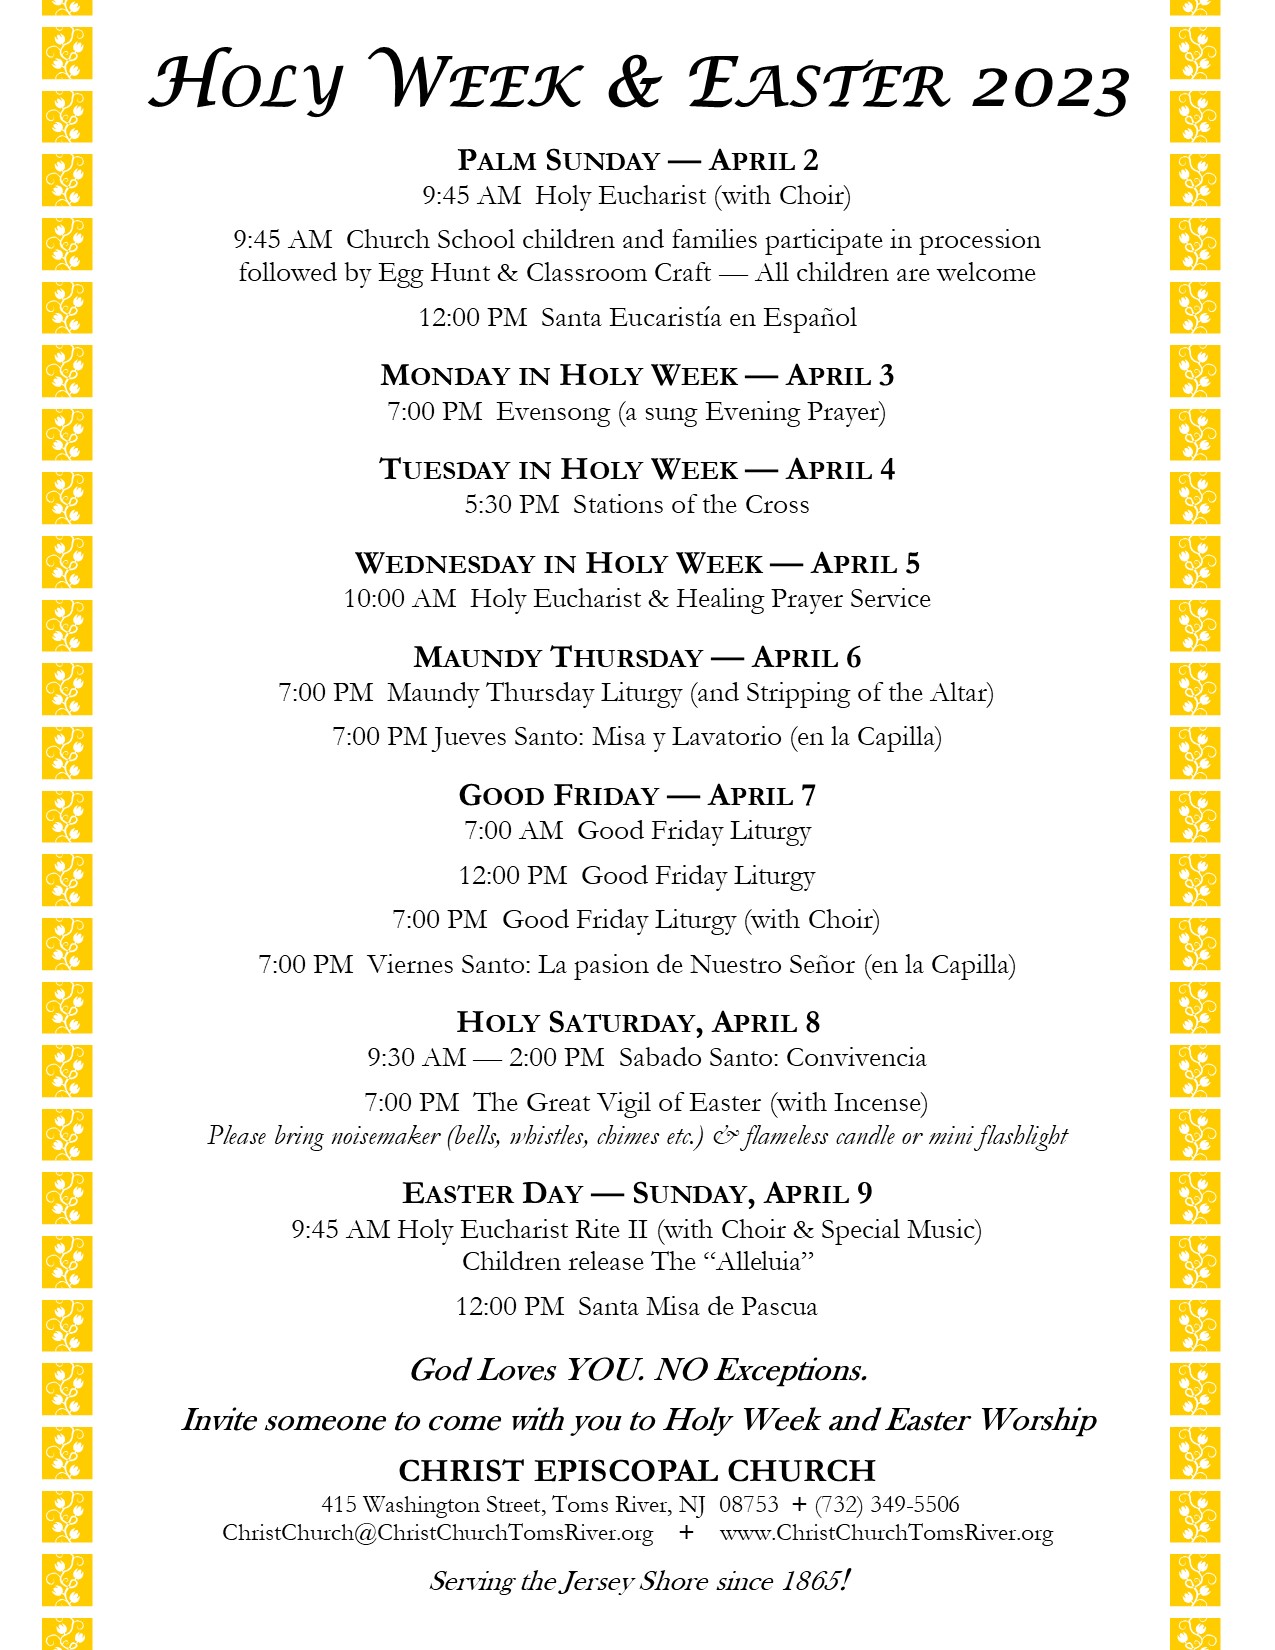 2023 Holy Week & Easter schedule full size